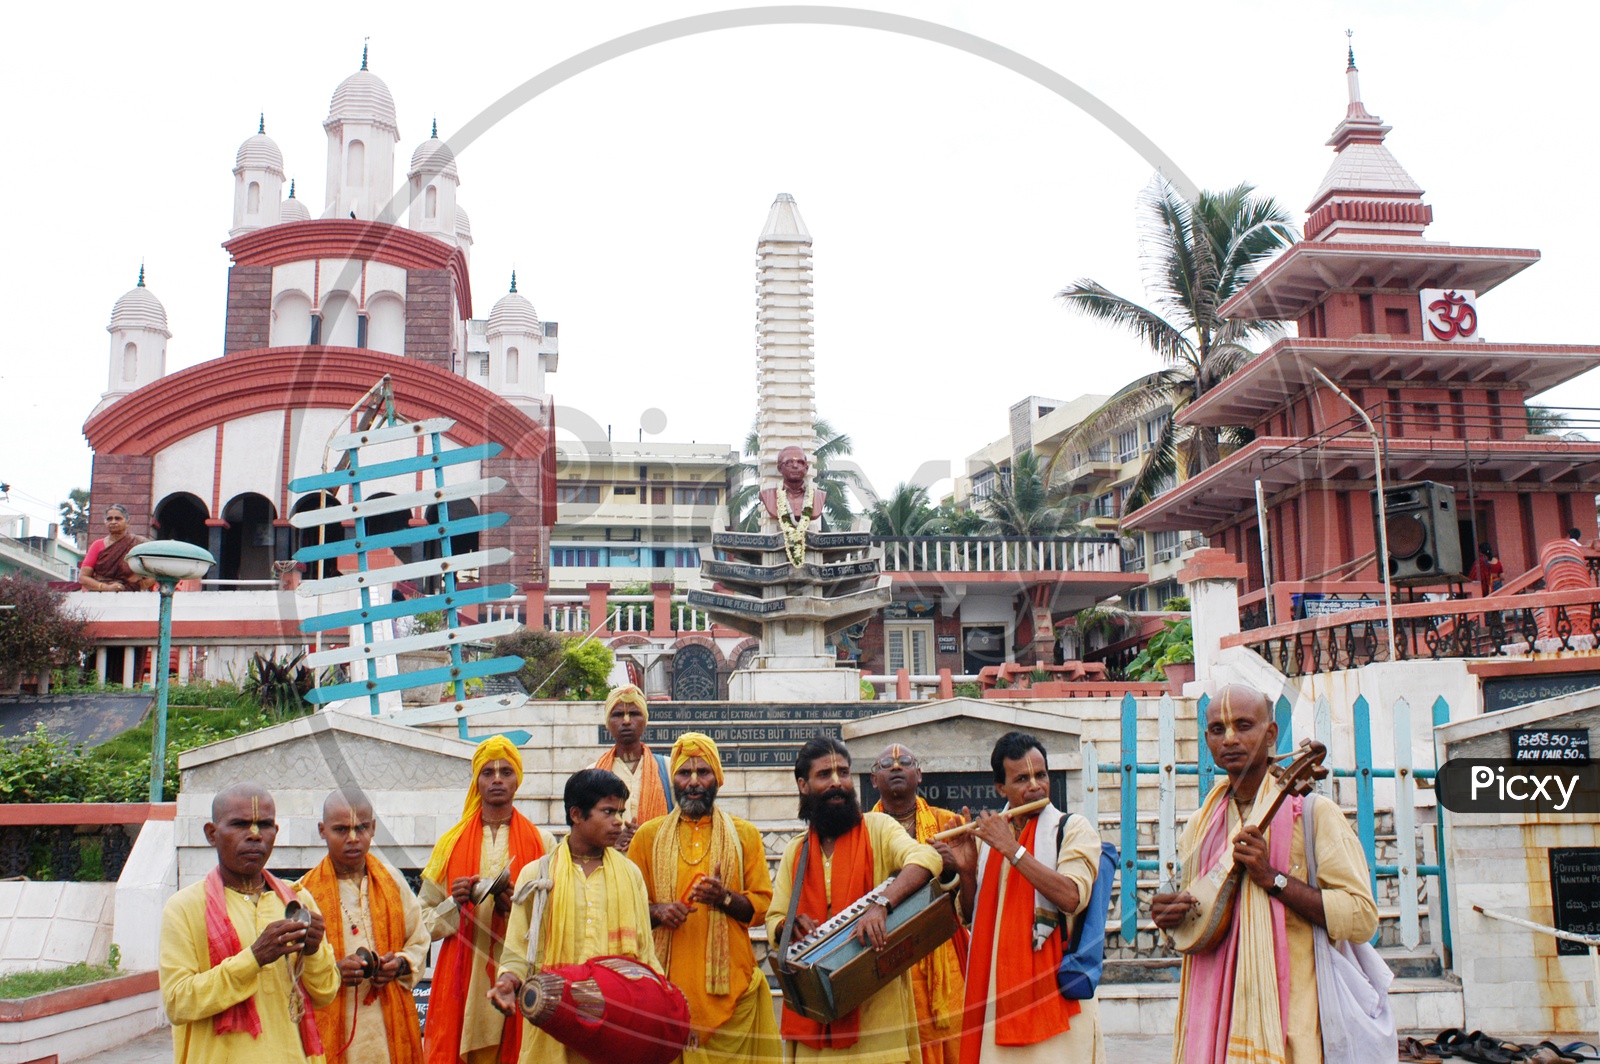 Devotees with musical instruments in front of a temple